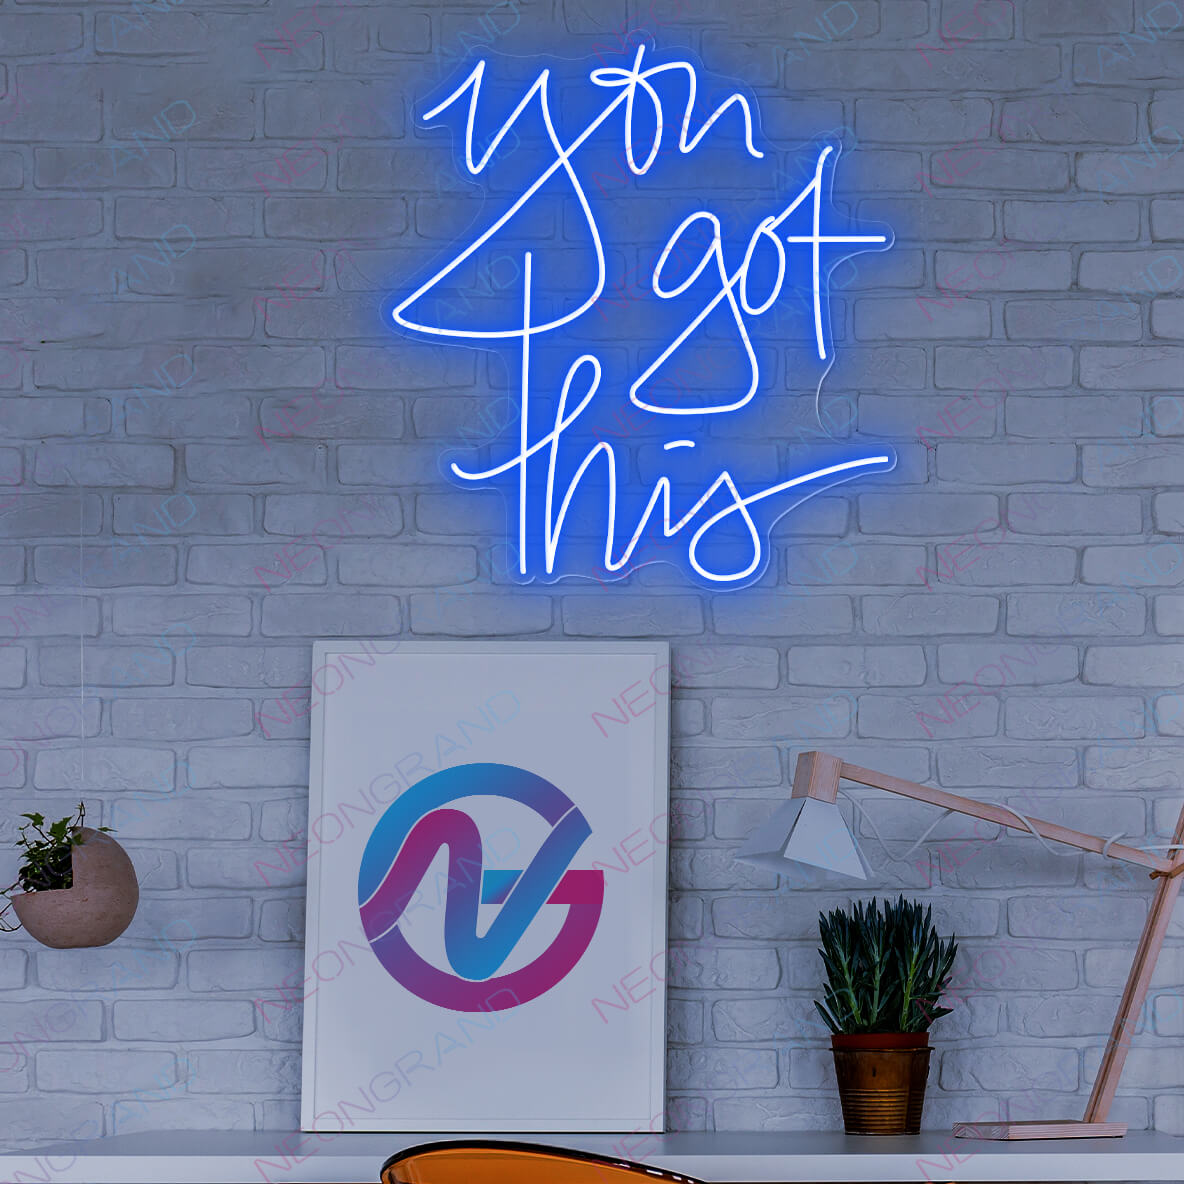 You Got This Neon Sign Led Light blue